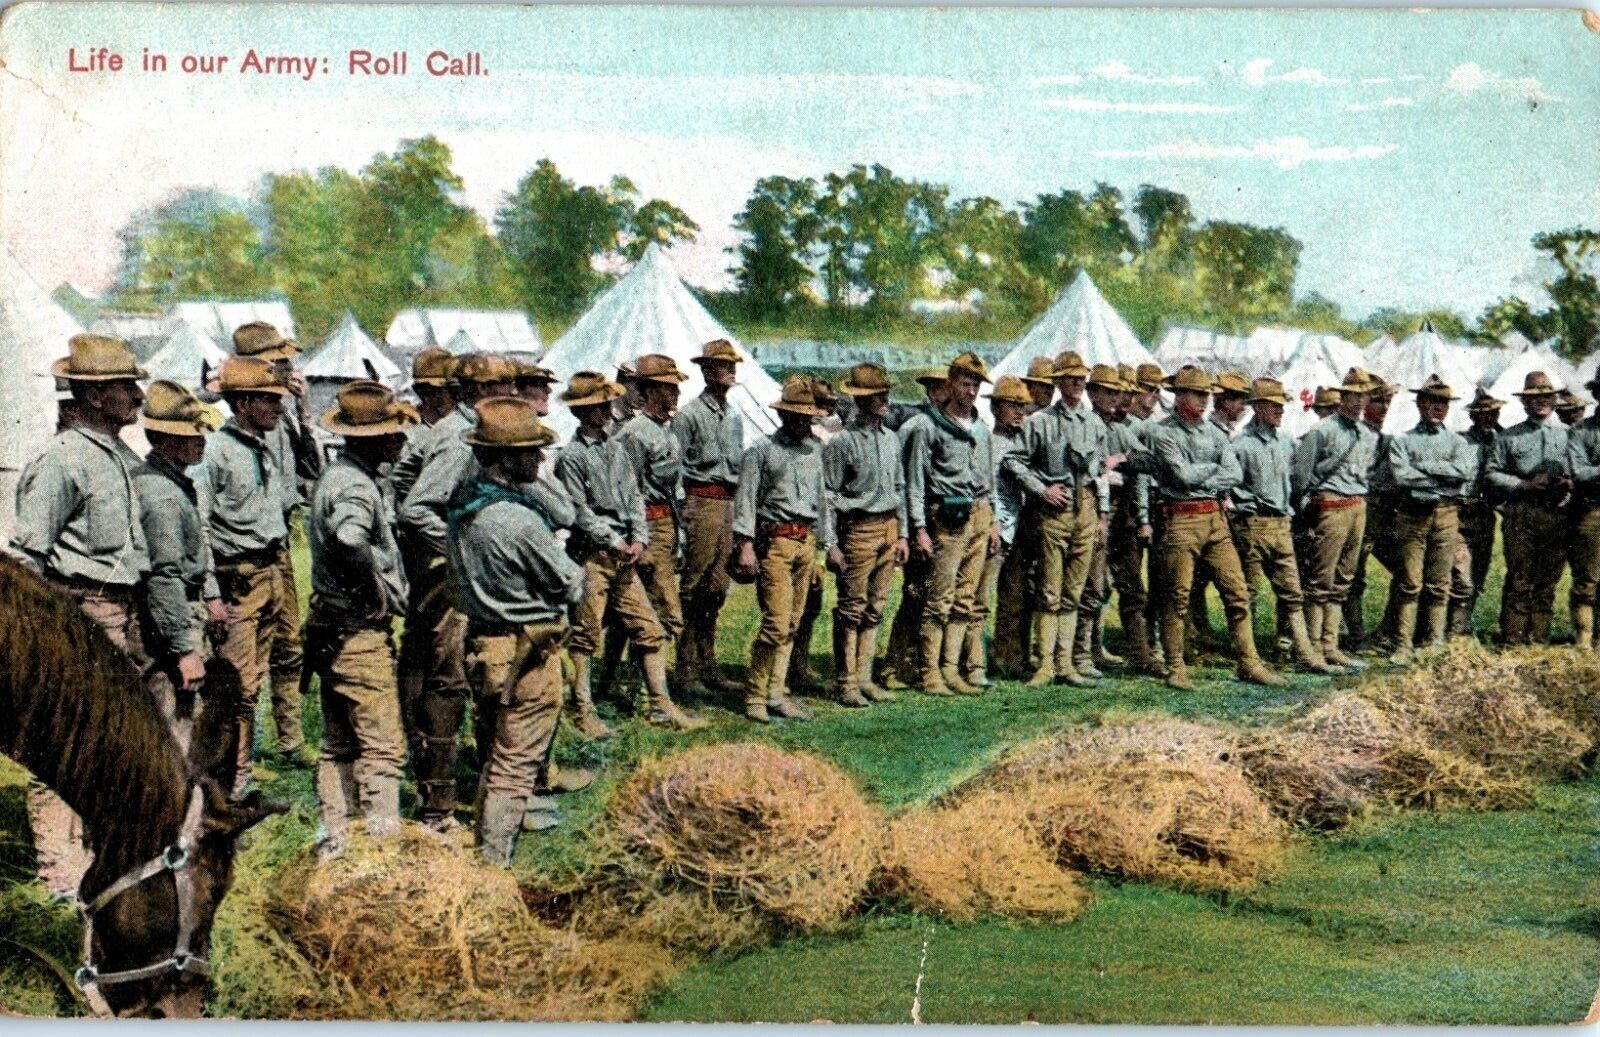 US ARMY ROLL CALL EARLY PRE 1907 UDB POSTCARD LIFE IN OUR ARMY SOLIDERS F1